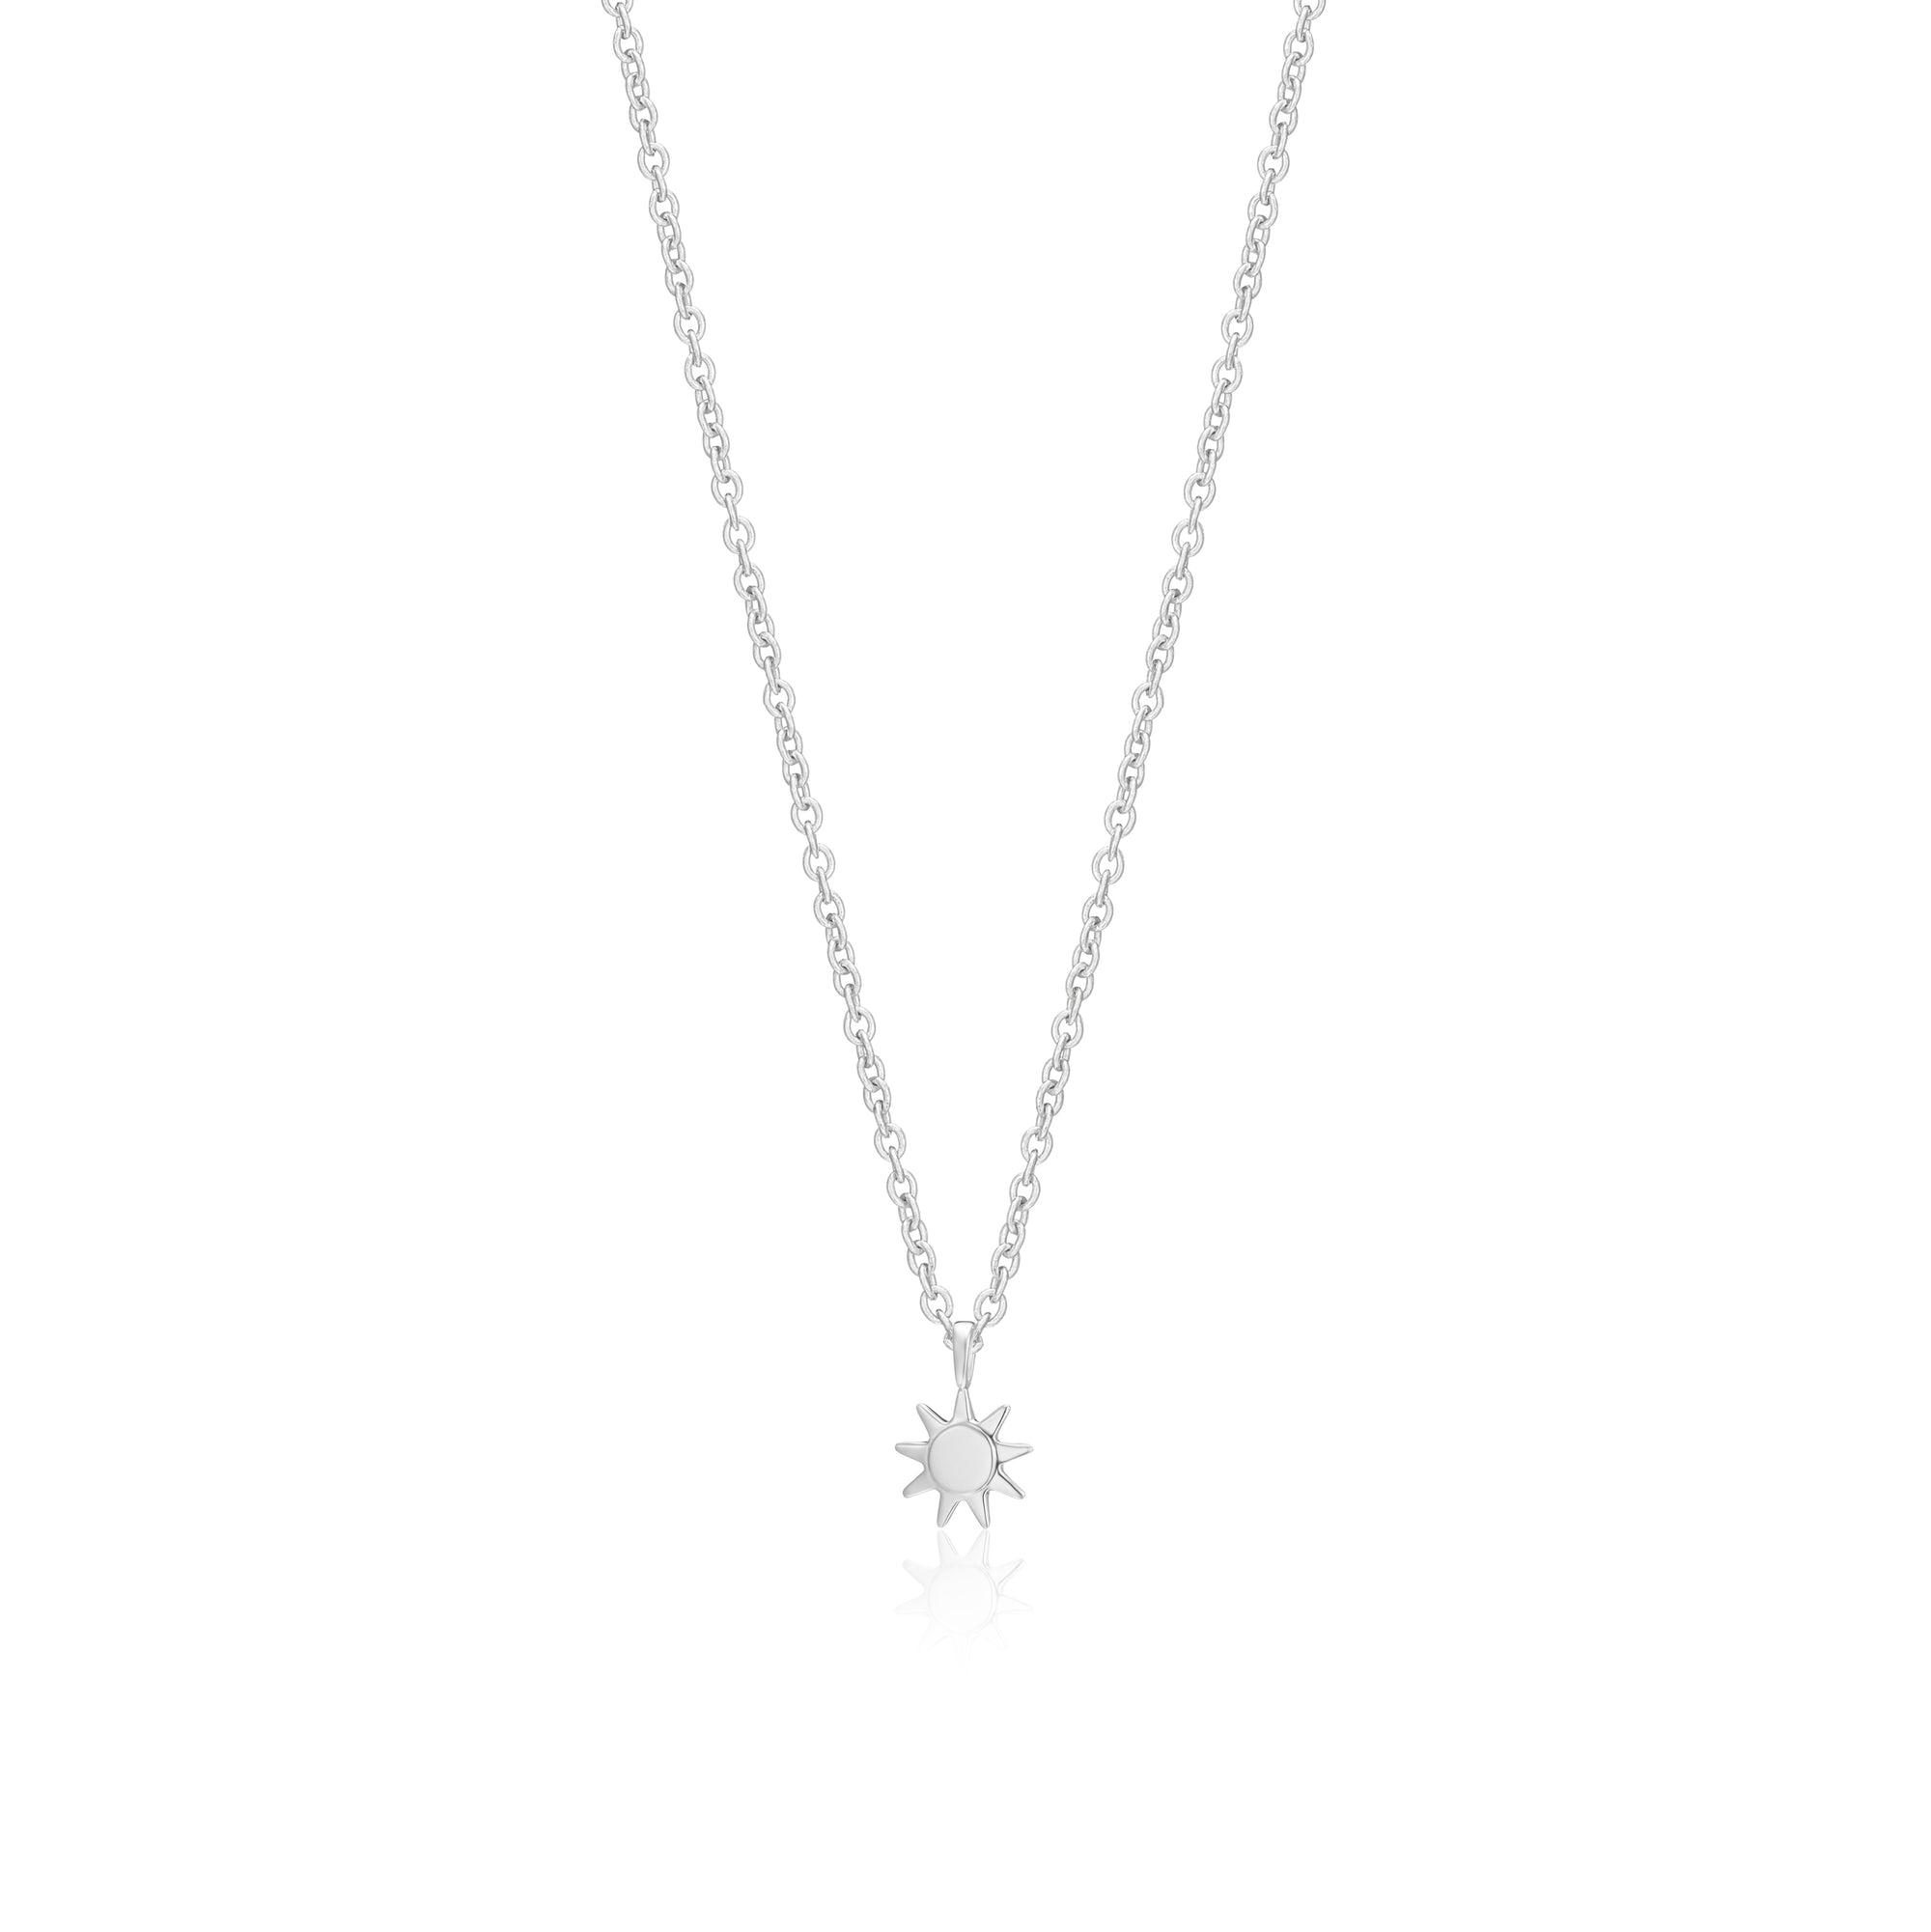 You Are My Sunshine Sunflower Necklaces For Women Rose Gold Silver Color  Long Chain Sun Flower Female Pendant Necklace Jewelry - Walmart.com